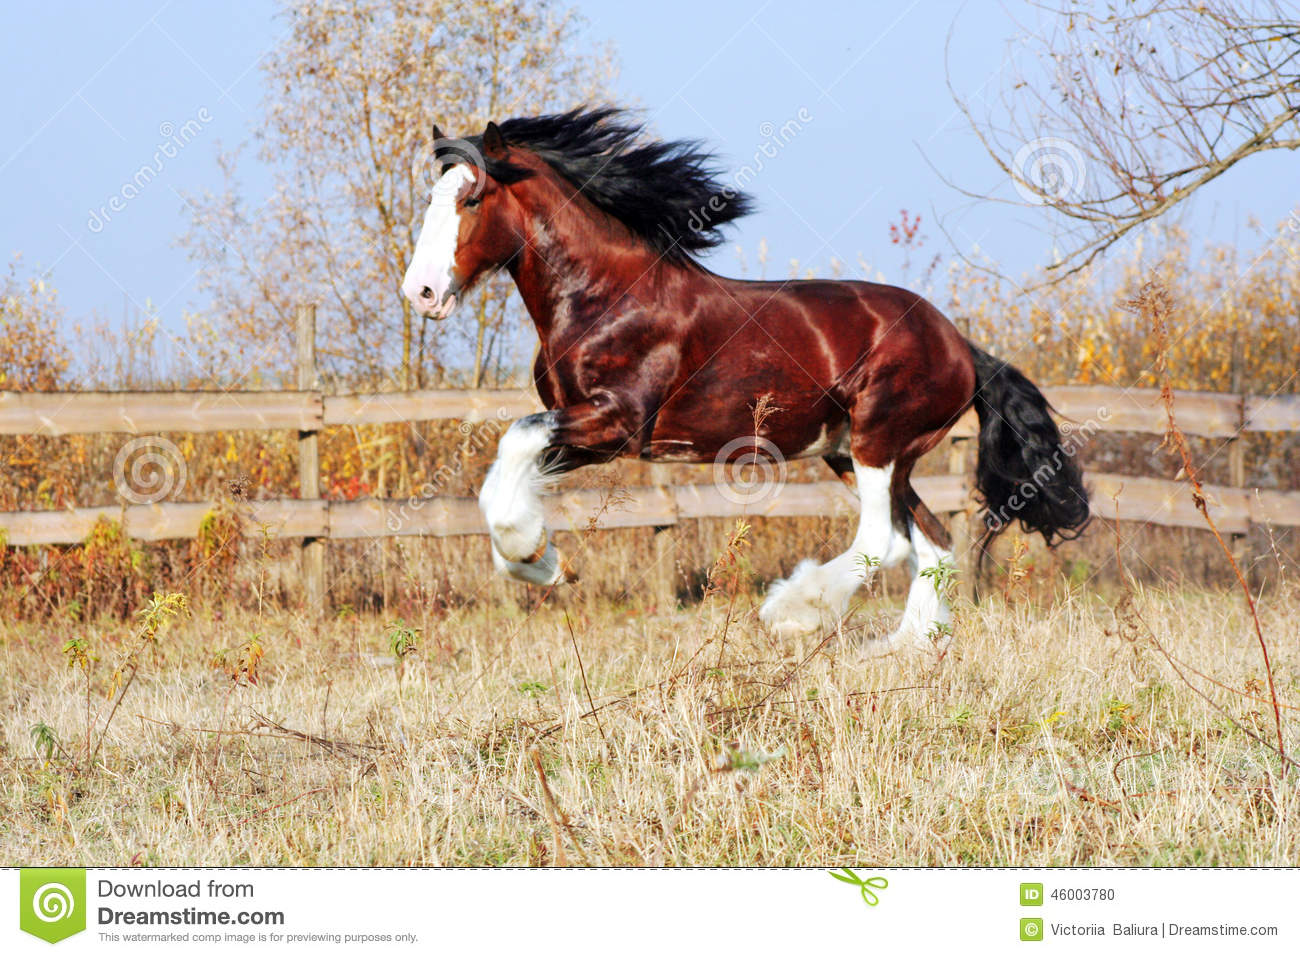 Clydesdale Horse Heavy Draft Horse Breed Bay Stallion Walks In The